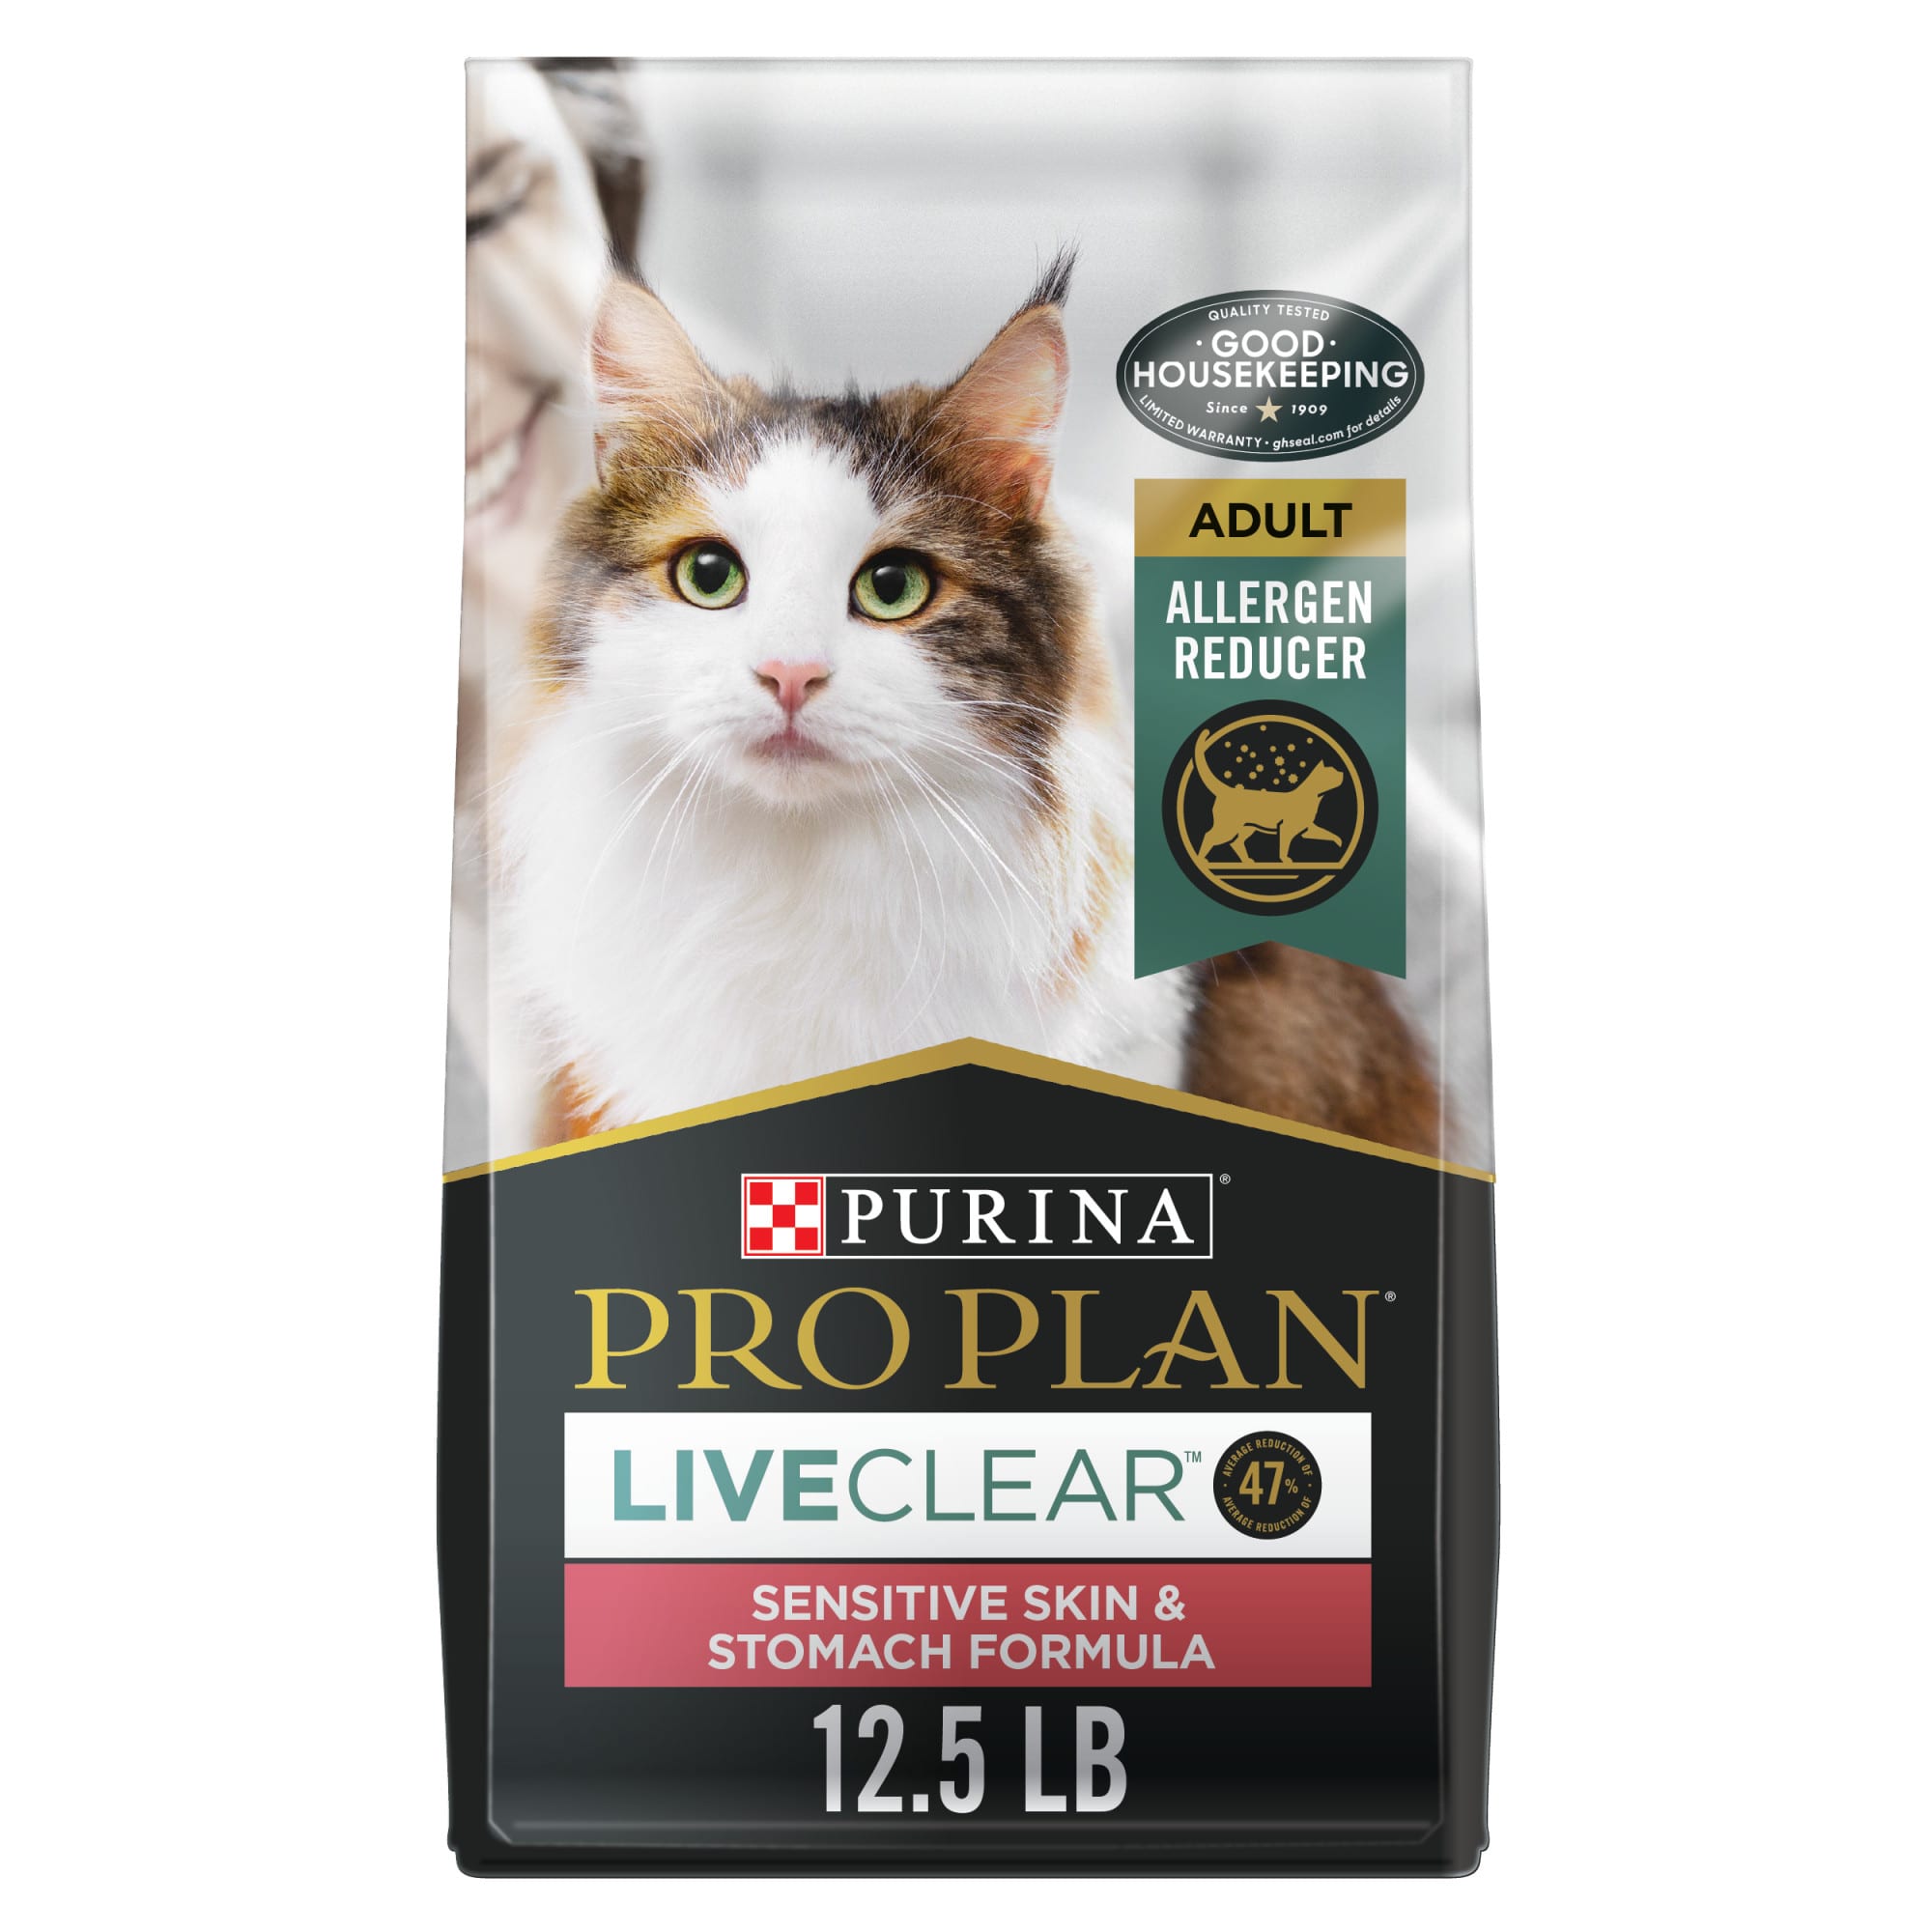 42-hq-pictures-hypoallergenic-cat-food-purina-the-8-best